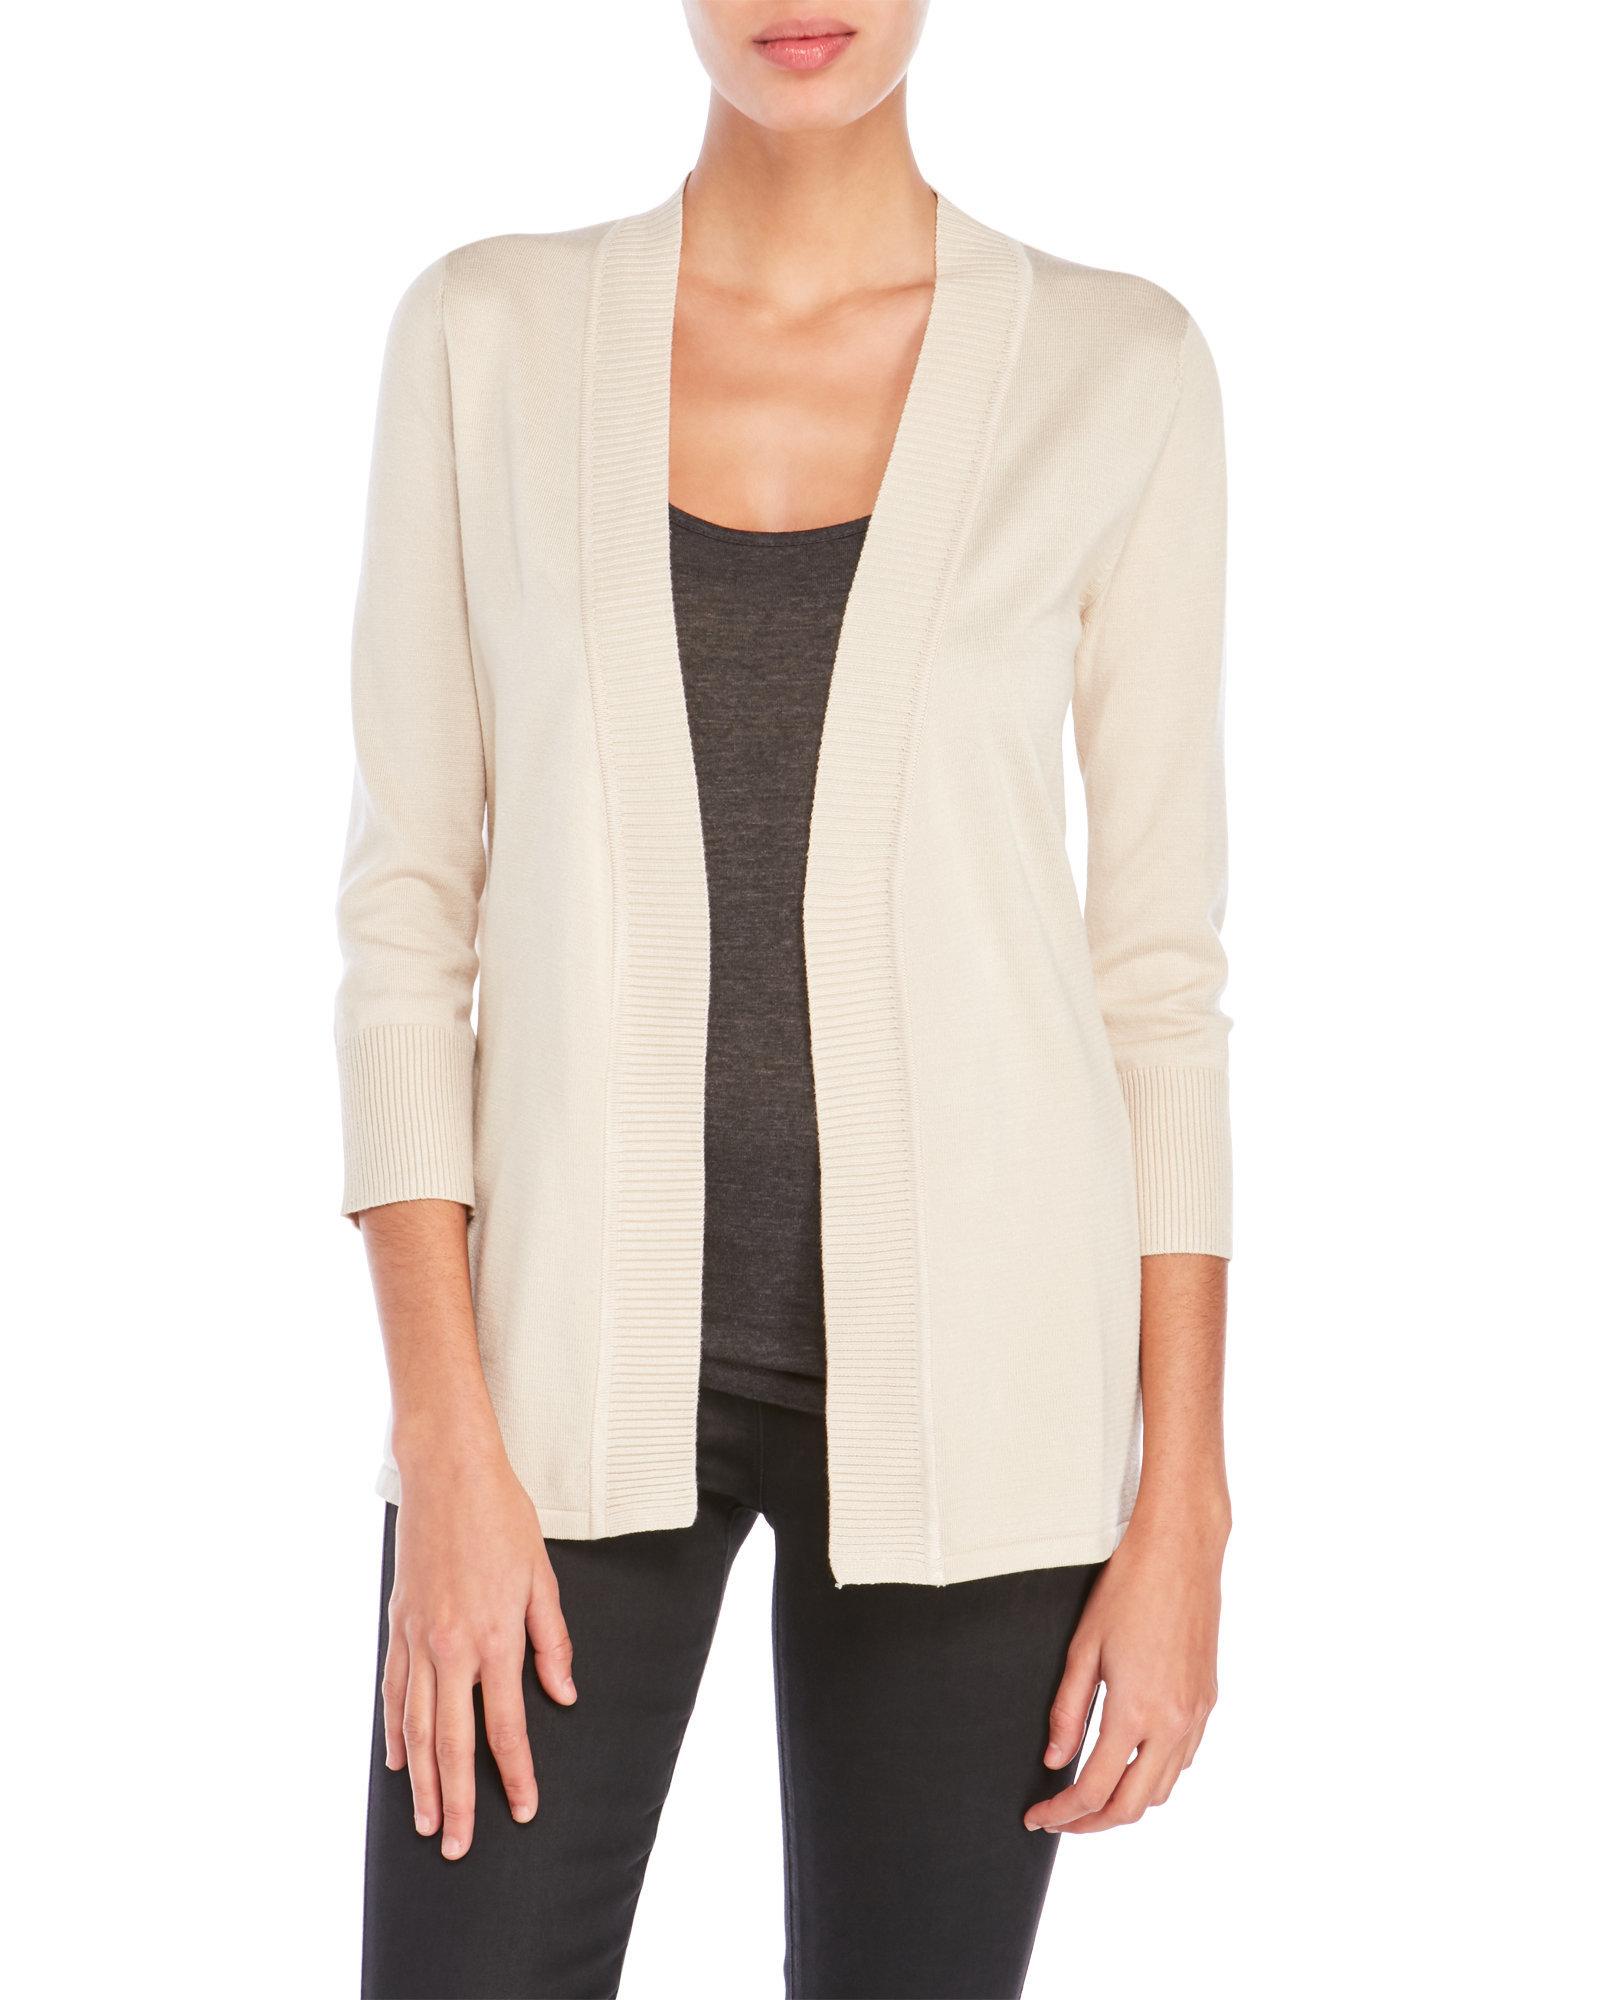 Lyst - Premise Studio Open Front Cardigan in Natural